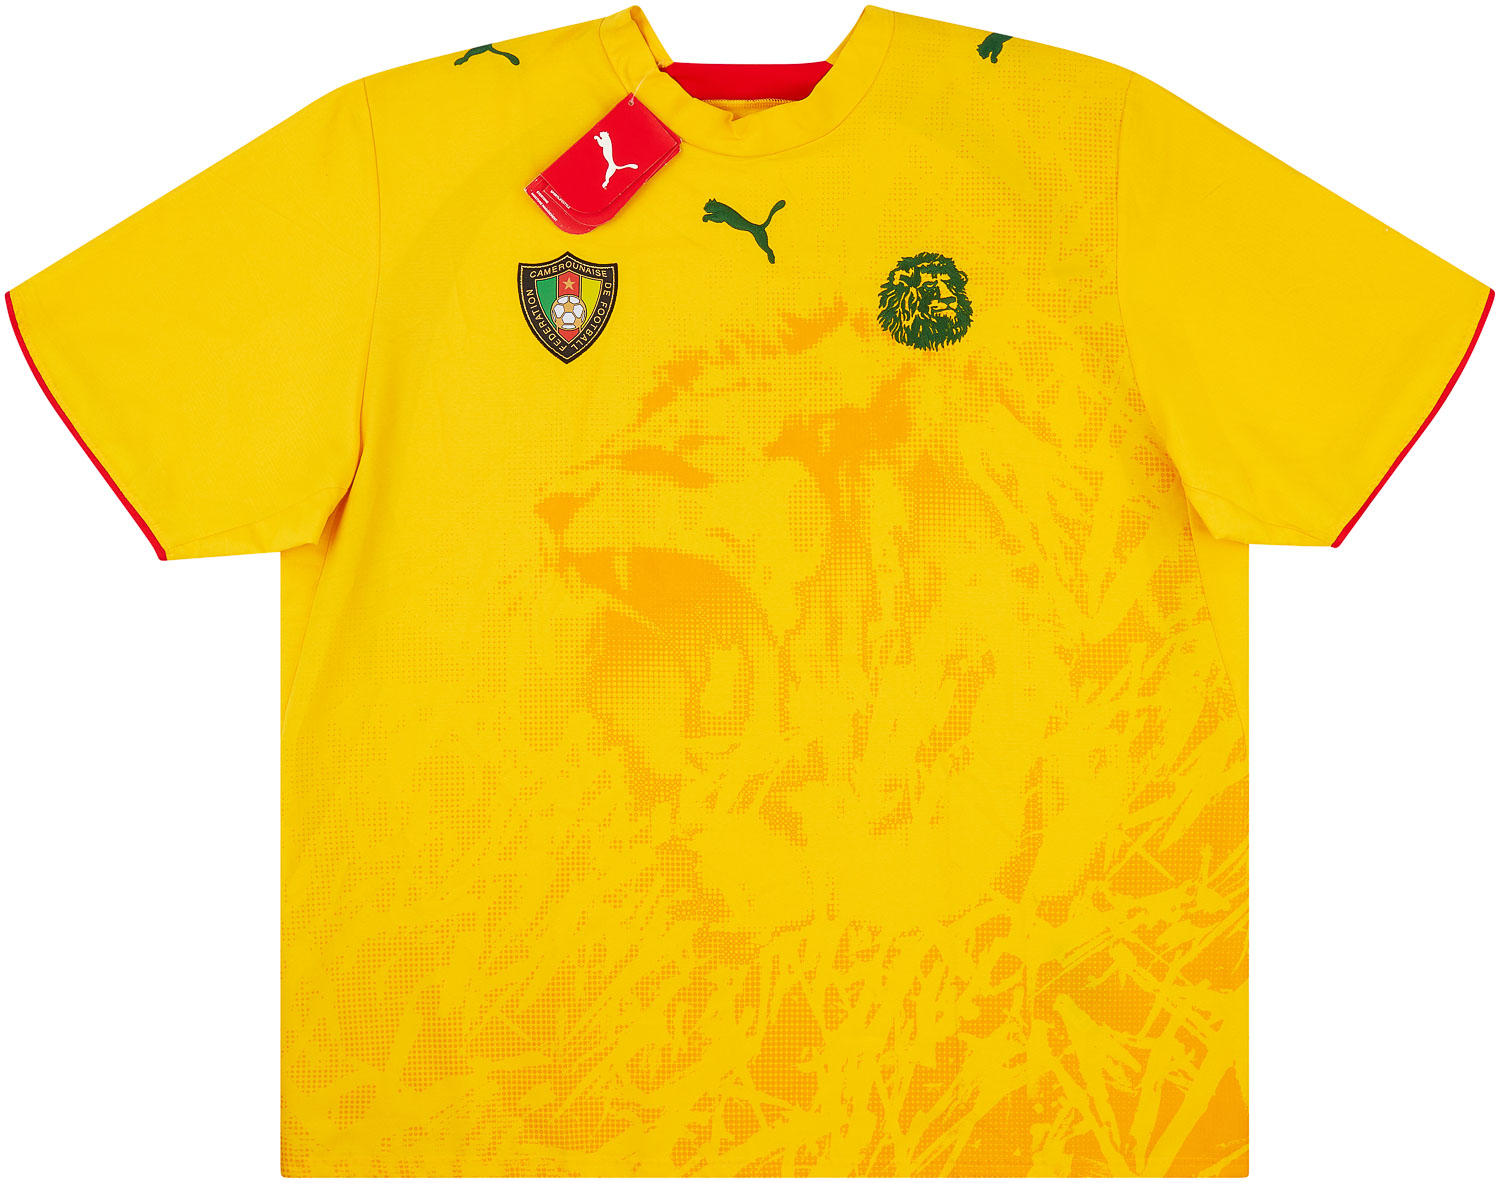 2006-08 Cameroon Away Shirt *New w/Defects*